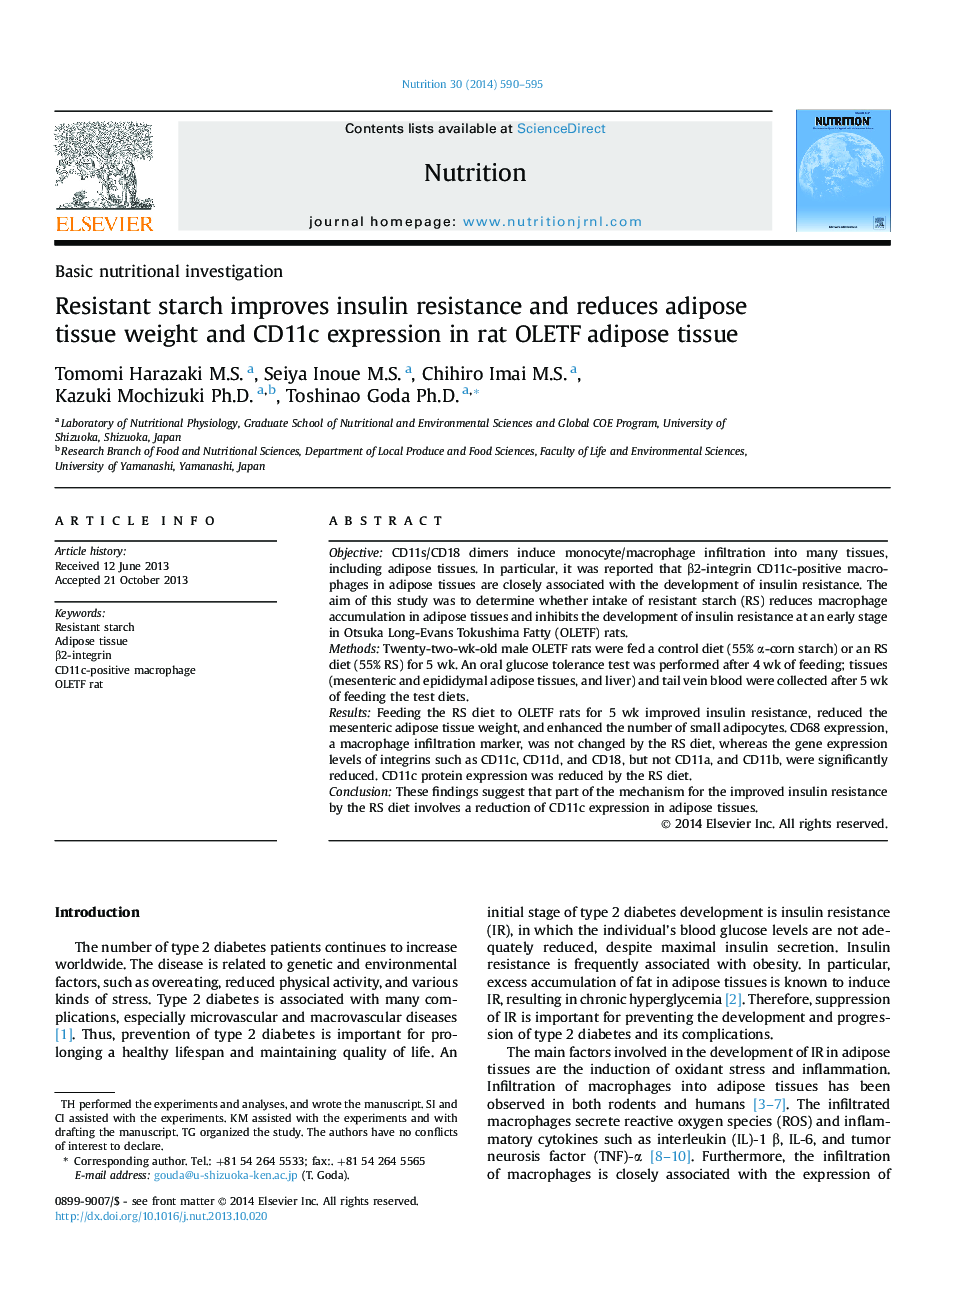 Basic nutritional investigationResistant starch improves insulin resistance and reduces adipose tissue weight and CD11c expression in rat OLETF adipose tissue